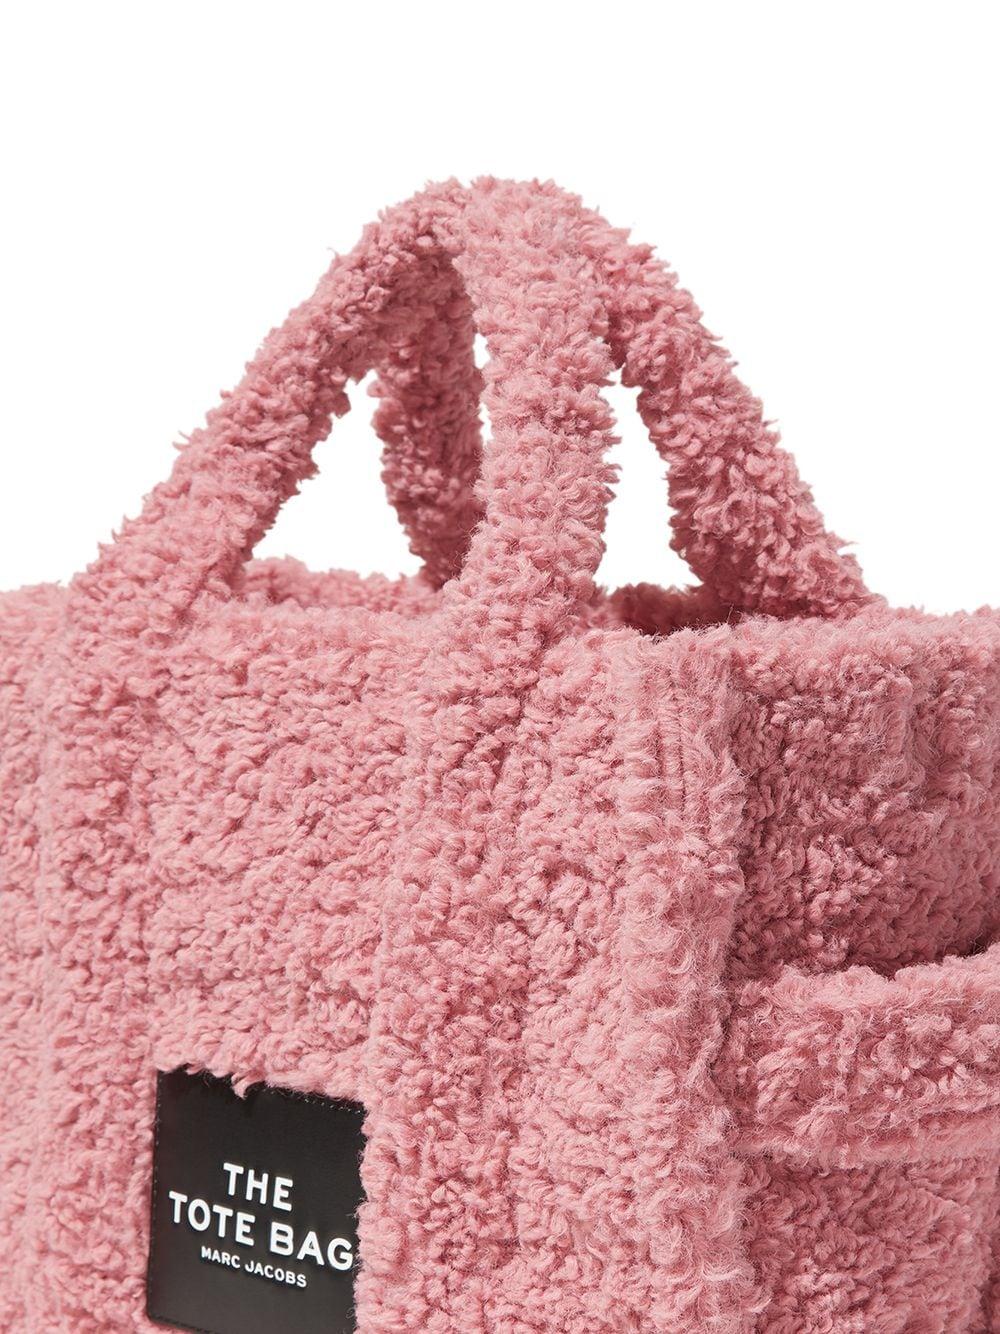 MARC JACOBS Pink Tote Bags